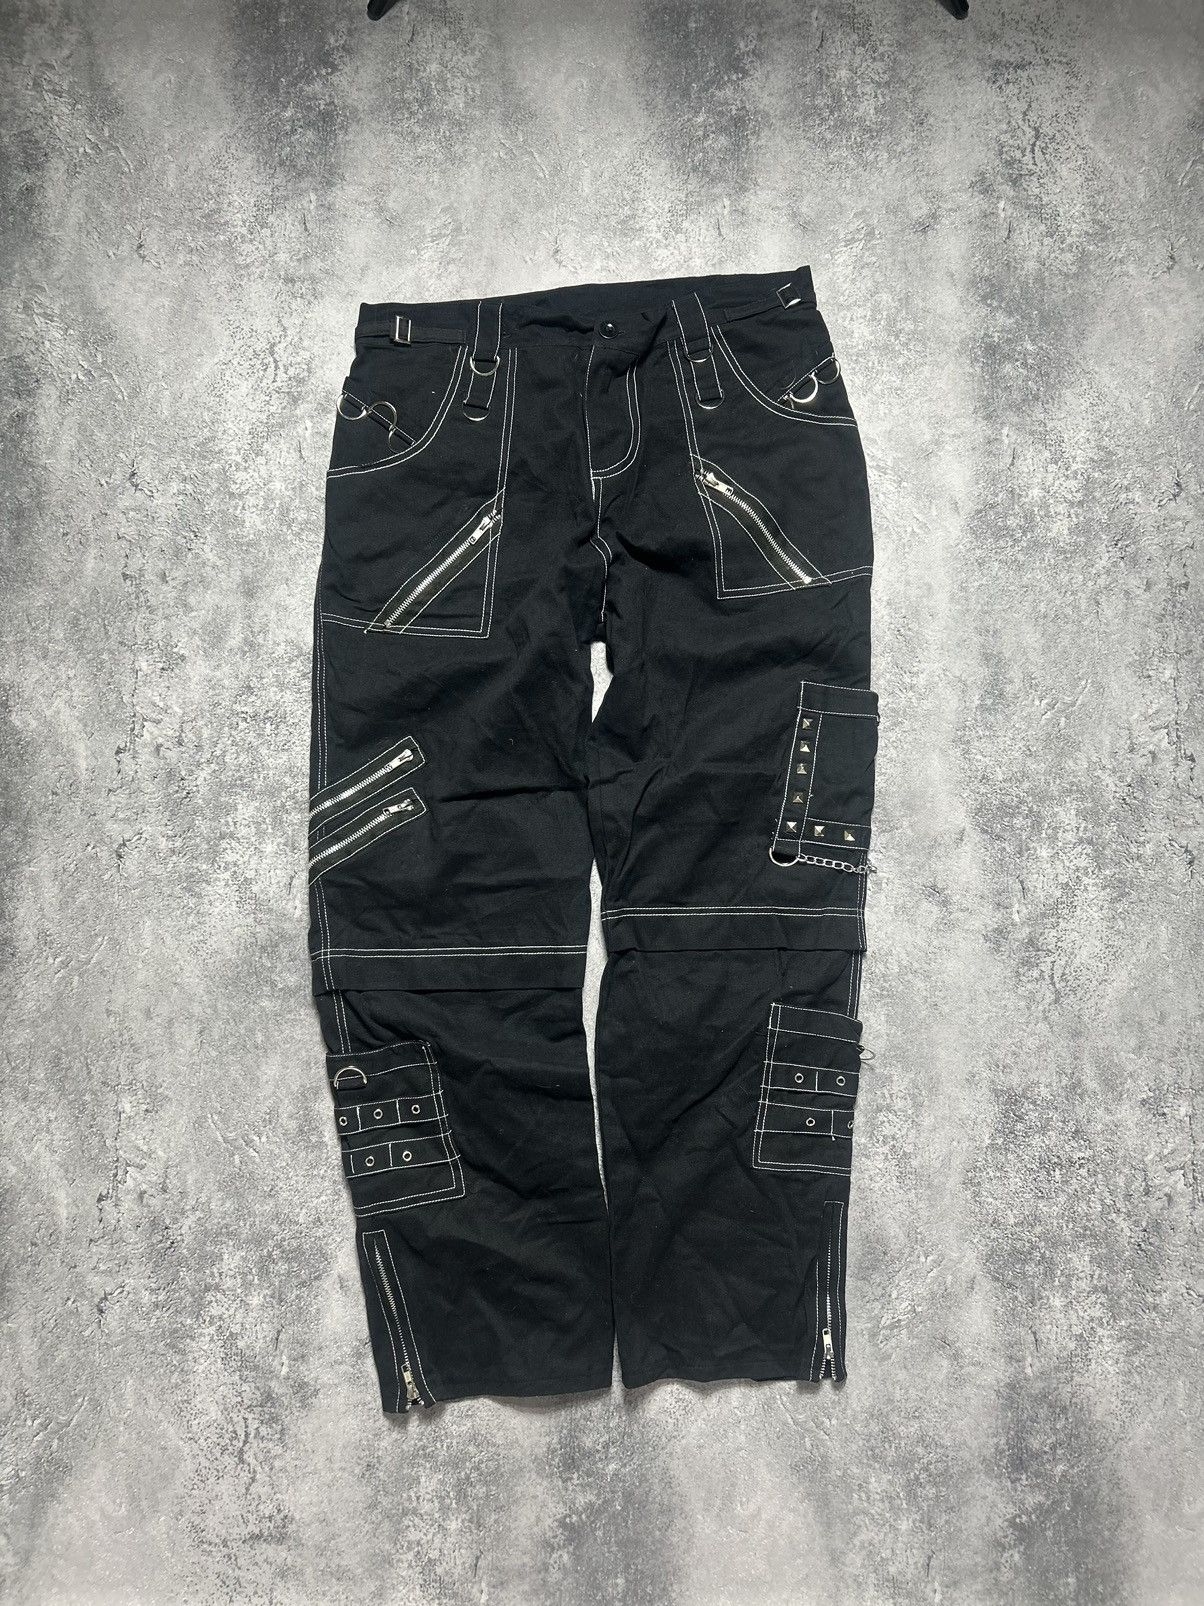 Men's Pant With Suspender Relaxed Fit Cotton